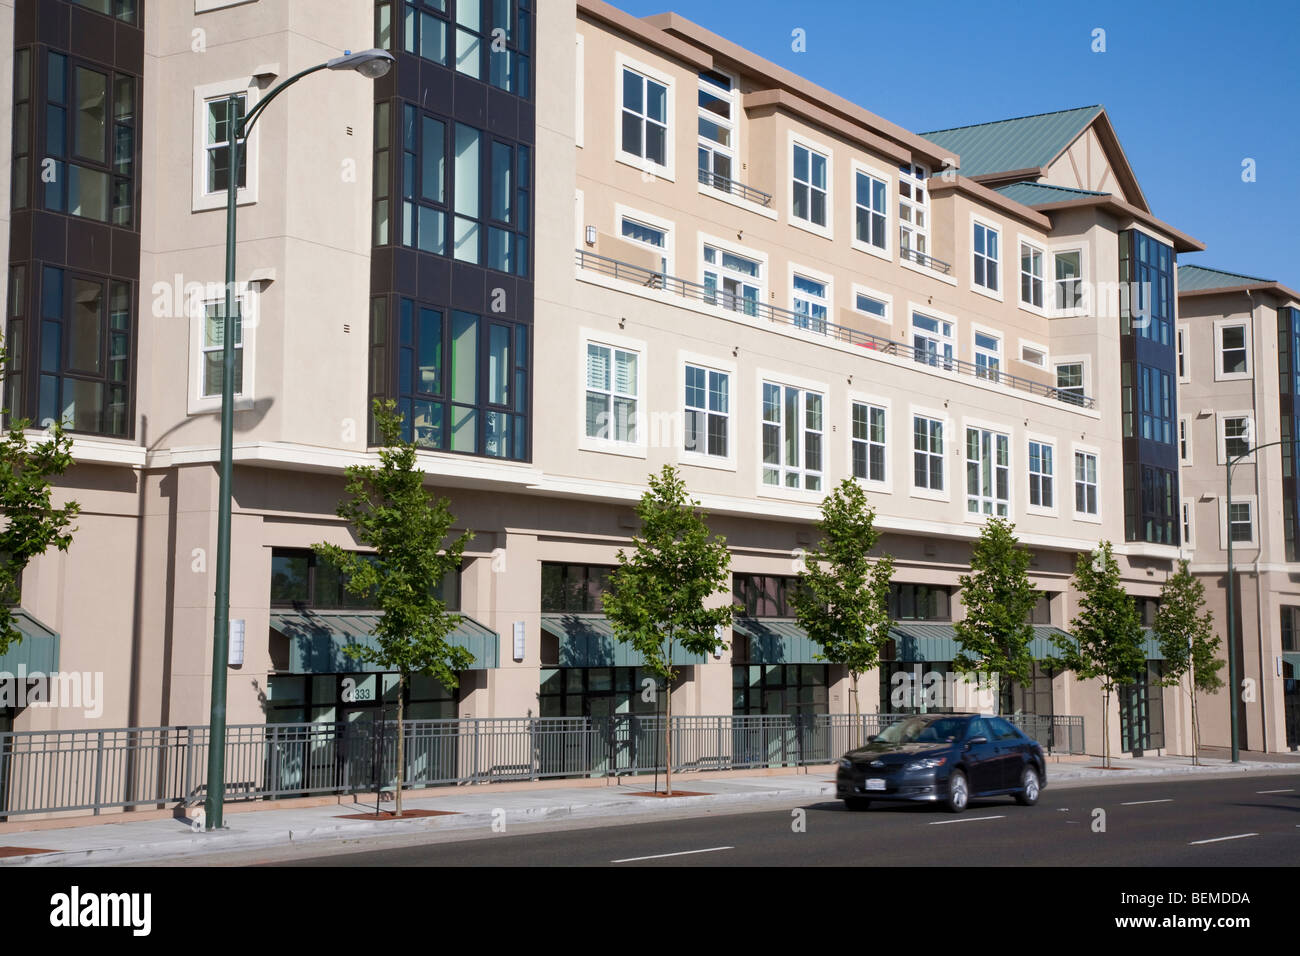 Mixed use housing development (multi use). Residential condominiums and office, retail space. Park Broadway, Millbrae, CA, USA Stock Photo